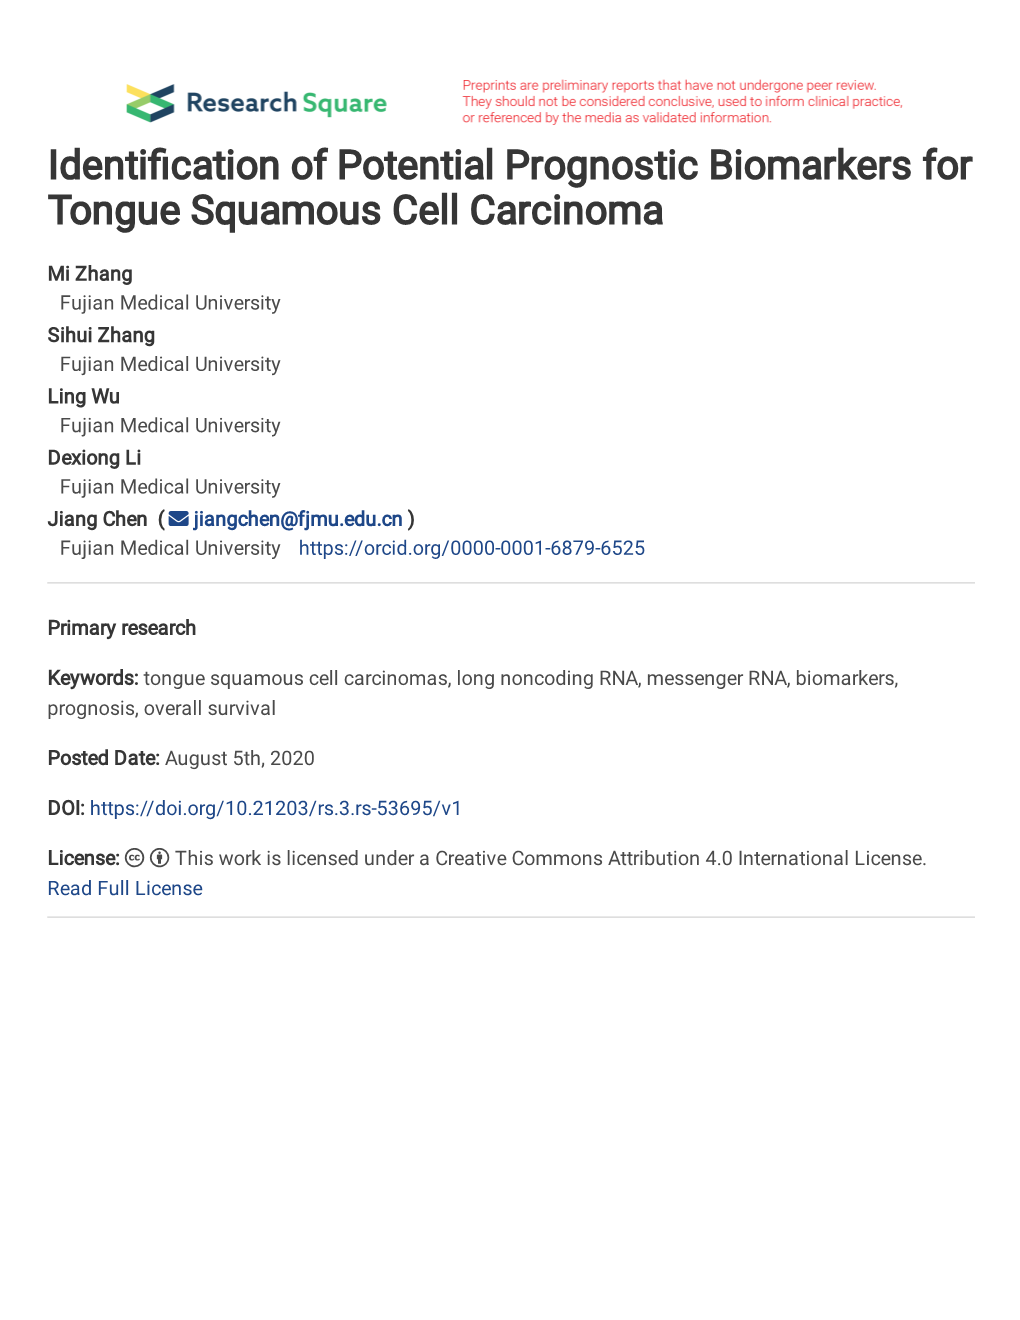 Identification of Potential Prognostic Biomarkers for Tongue Squamous Cell Carcinoma